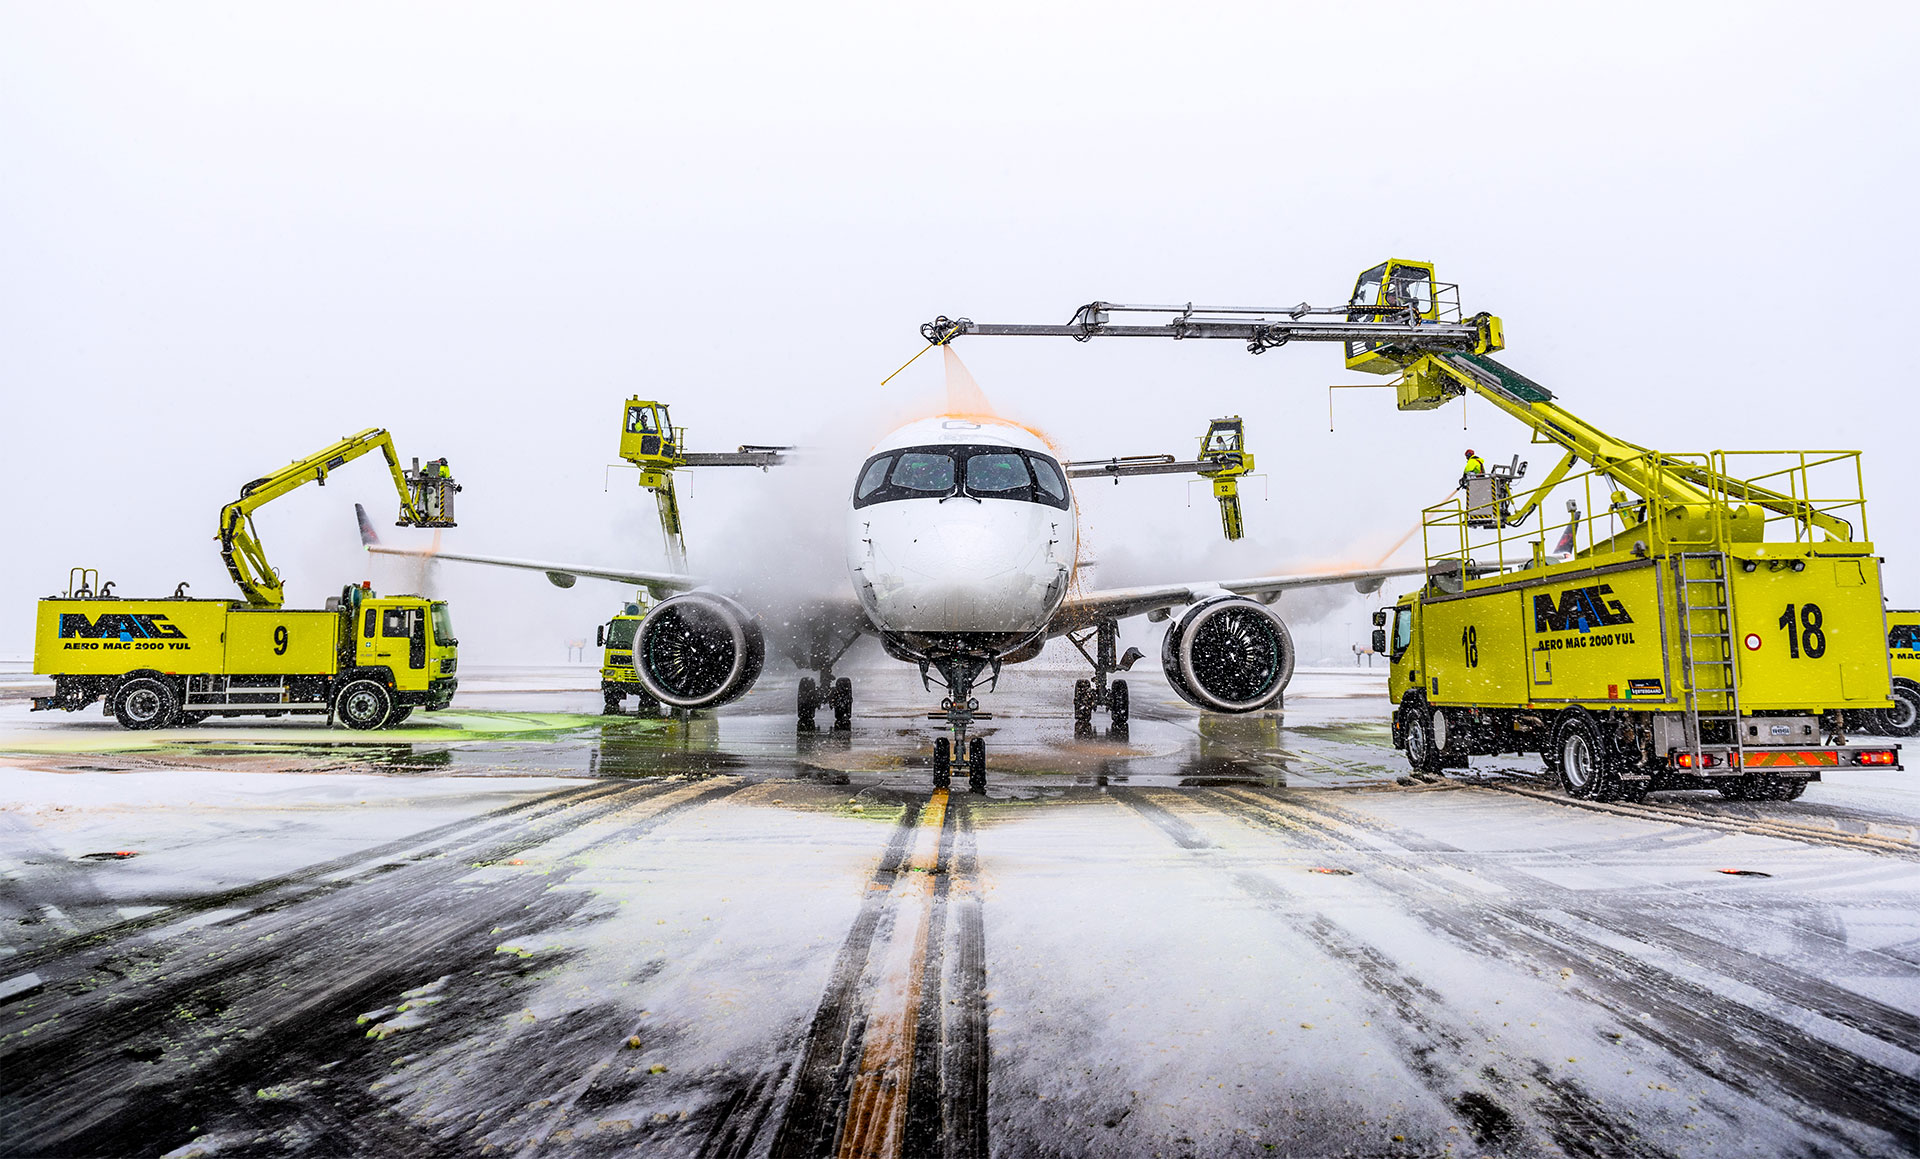 Ordinary chaos: the inner workings of winter airline operations - Skies Mag